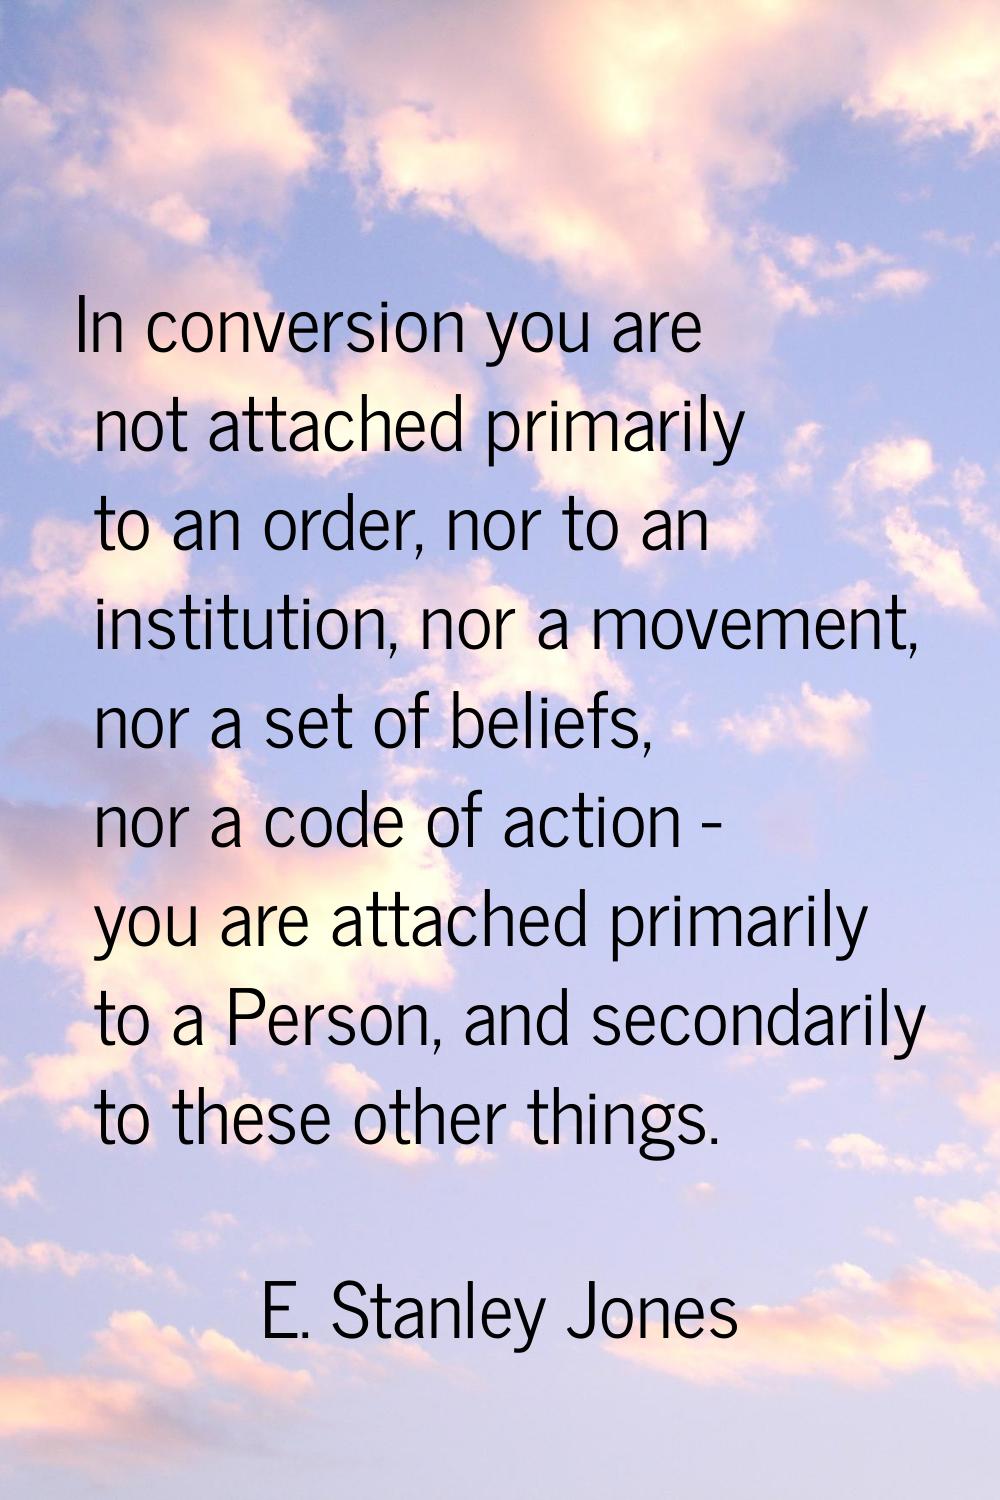 In conversion you are not attached primarily to an order, nor to an institution, nor a movement, no